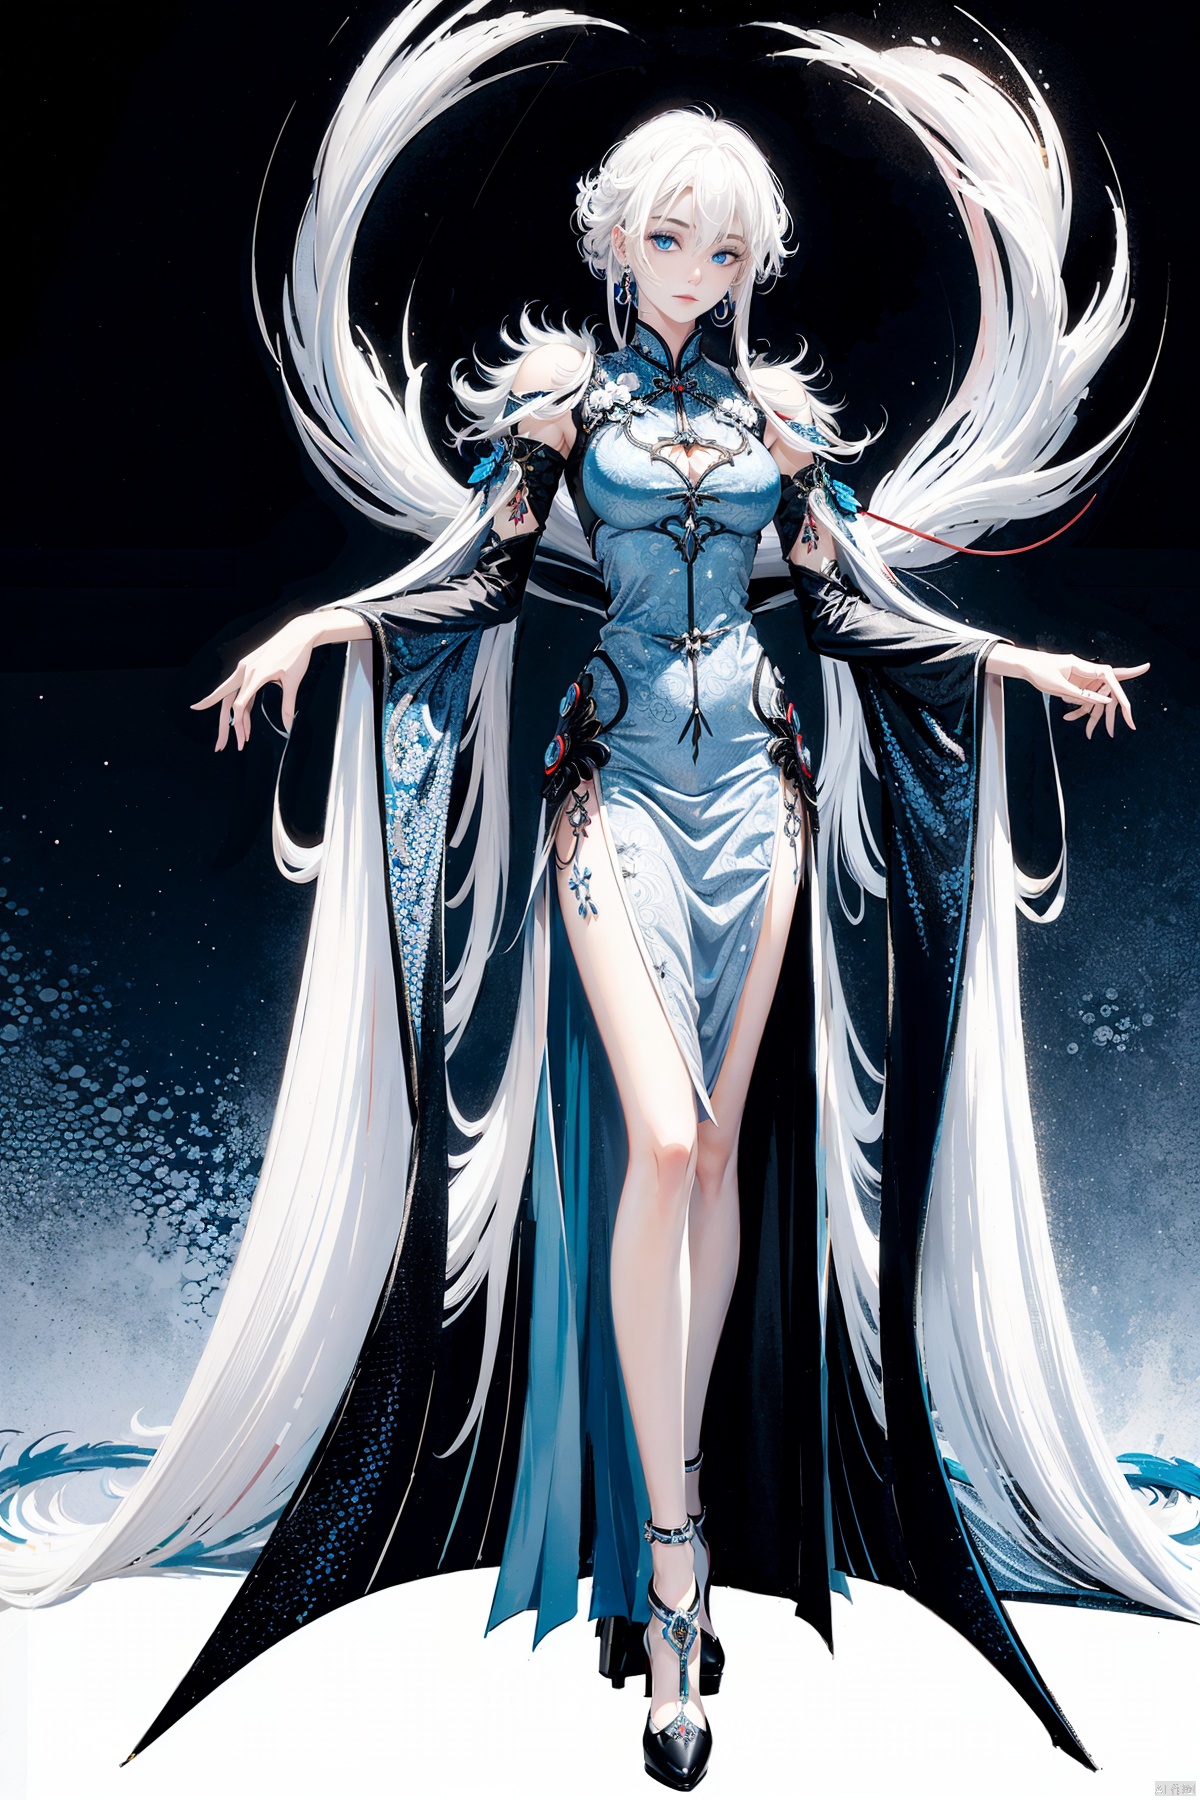  A demon with (white hair:1.5),(blue eyes:1.5) resembling blue gemstones, and a fringed haircut. This demon exudes an outgoing and sunny personality. She is dressed in a peculiar, mechanical construct cheongsam gown, predominantly made of gossamer material, with accents that evoke the ambiance of fire element. The cheongsam gown itself is in vibrant Chinese red. Completing her ensemble, she wears a pair of high-heeled shoes.
, col